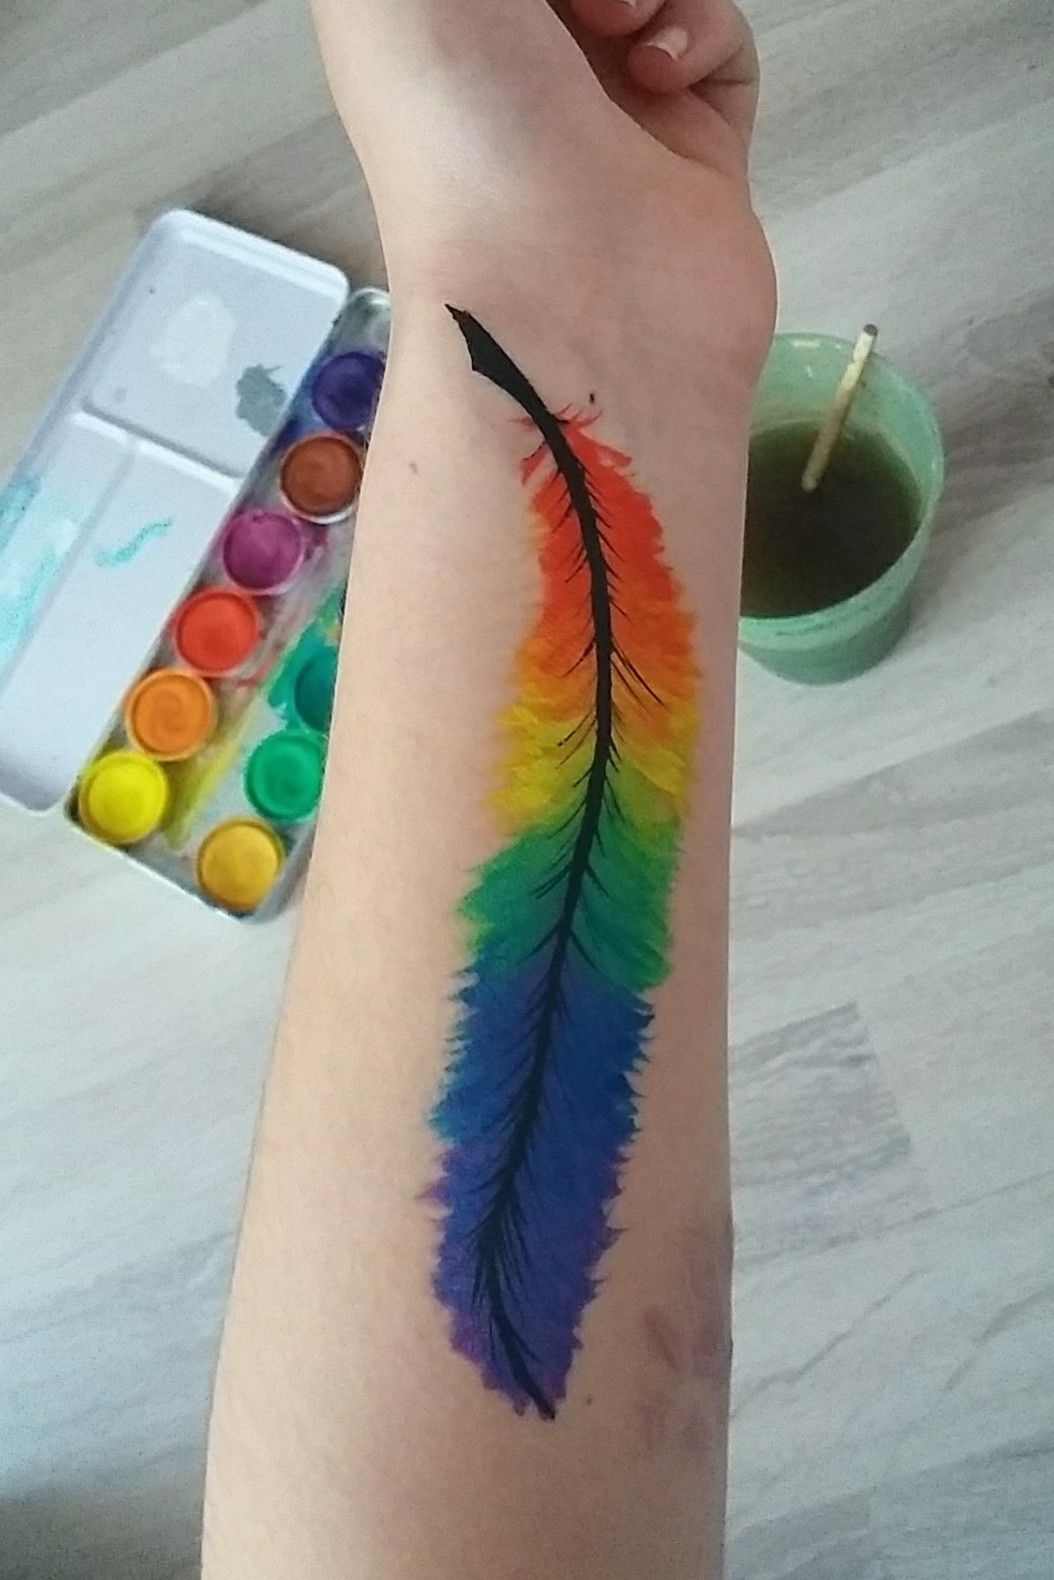 Silver Wing and Rainbow Wing from Pokémon GoldSilverHGSS by Gary Dunn of  Chapter One Tattoo  rnerdtattoos